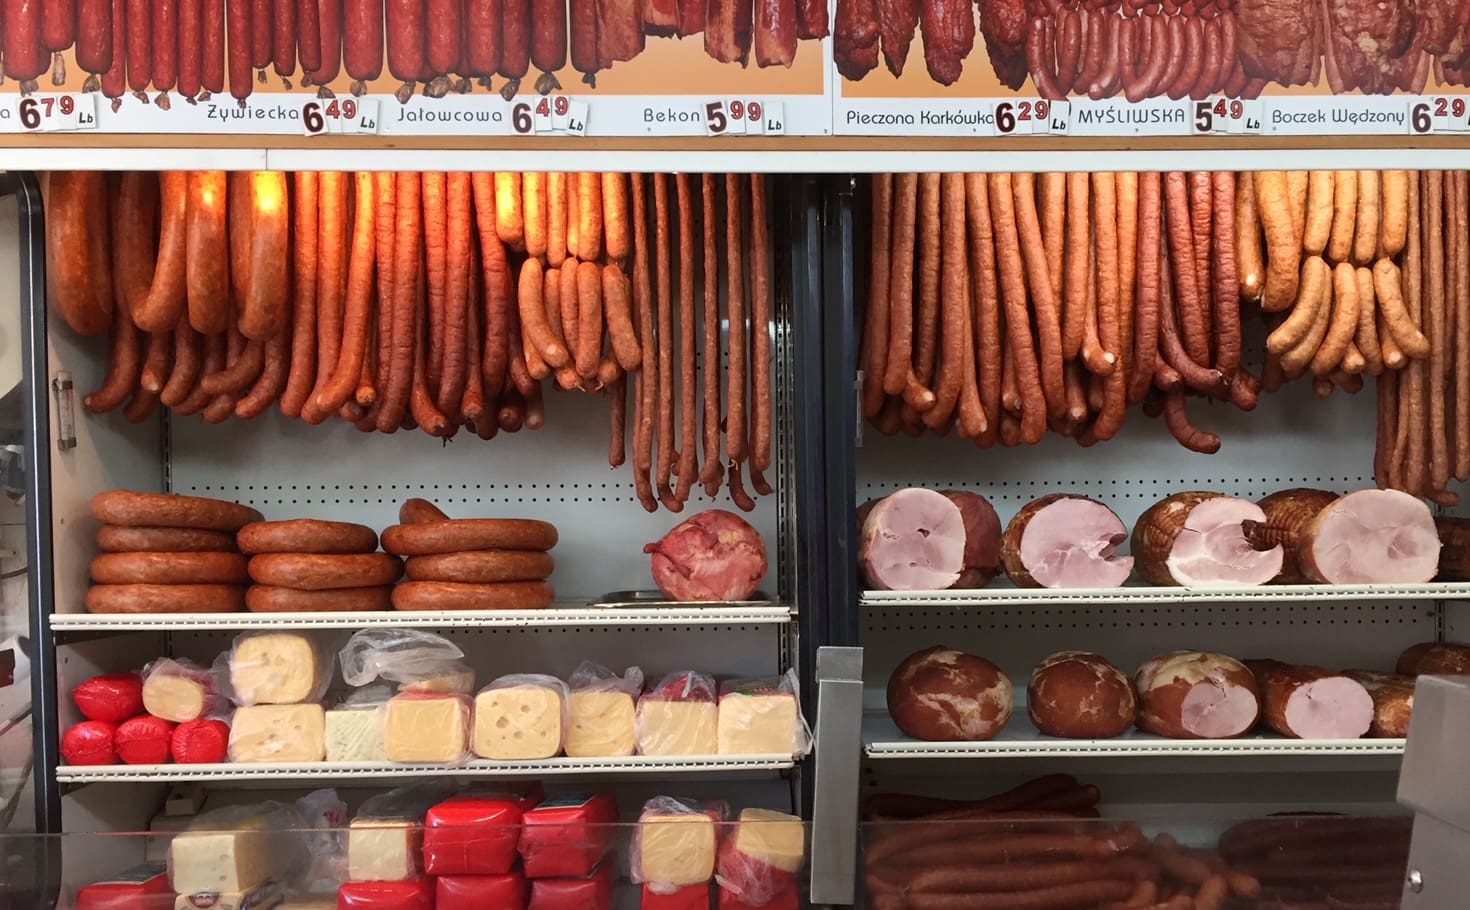 A small shop of so many Sausages